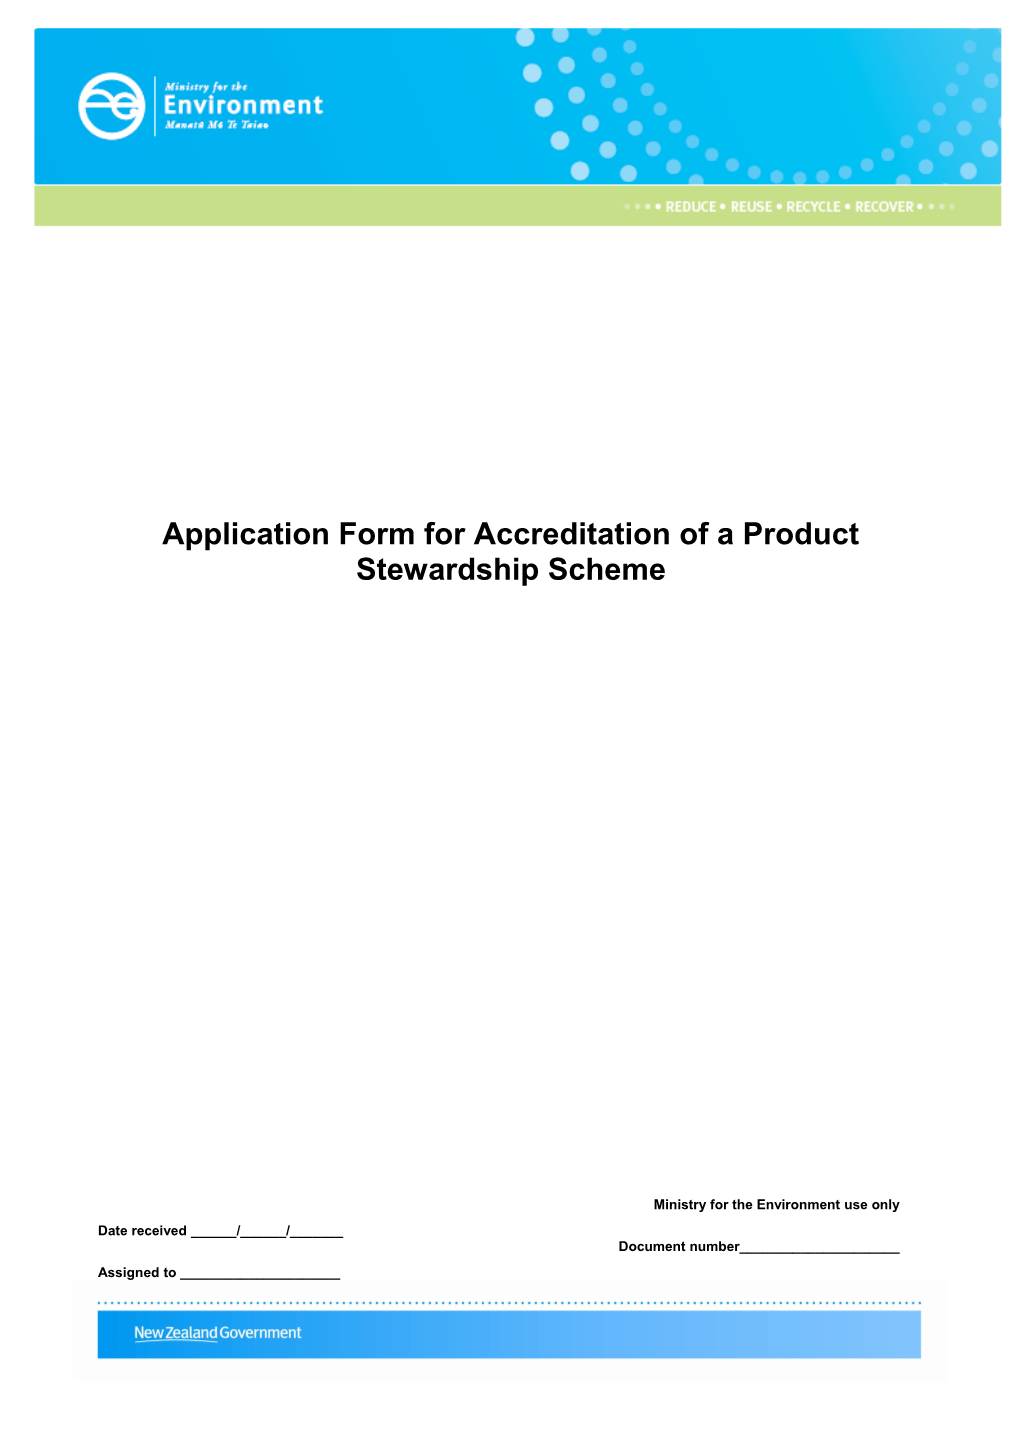 Updated Application Form for Accreditation of a Product Stewardship Scheme